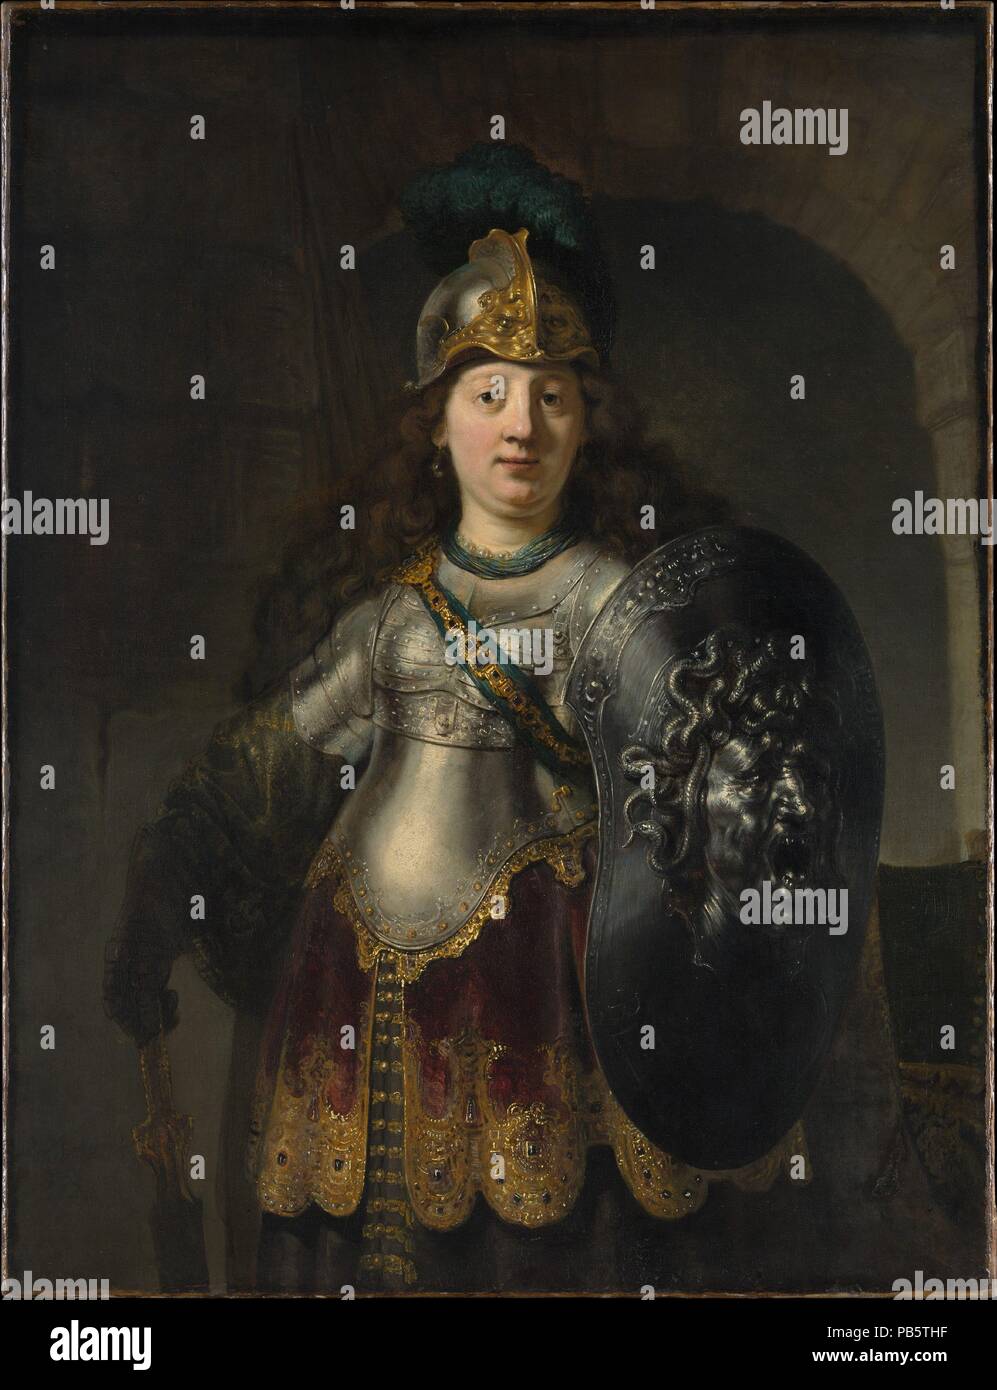 Bellona. Artist: Rembrandt (Rembrandt van Rijn) (Dutch, Leiden 1606-1669 Amsterdam). Dimensions: 50 x 38 3/8 in. (127 x 97.5 cm). Date: 1633.  Rembrandt's sober and powerful depiction of Bellona, the Roman goddess of war, was perhaps intended to suggest the new Dutch Republic's readiness to repel foreign forces. Images of Mars and his sister Bellona occasionally decorated the headquarters of civic guard companies. The shield, with its frightful face of Medusa, was added at a late stage of work, probably in response to seeing a version of Rubens's well-known painting of a severed Medusa's head. Stock Photo